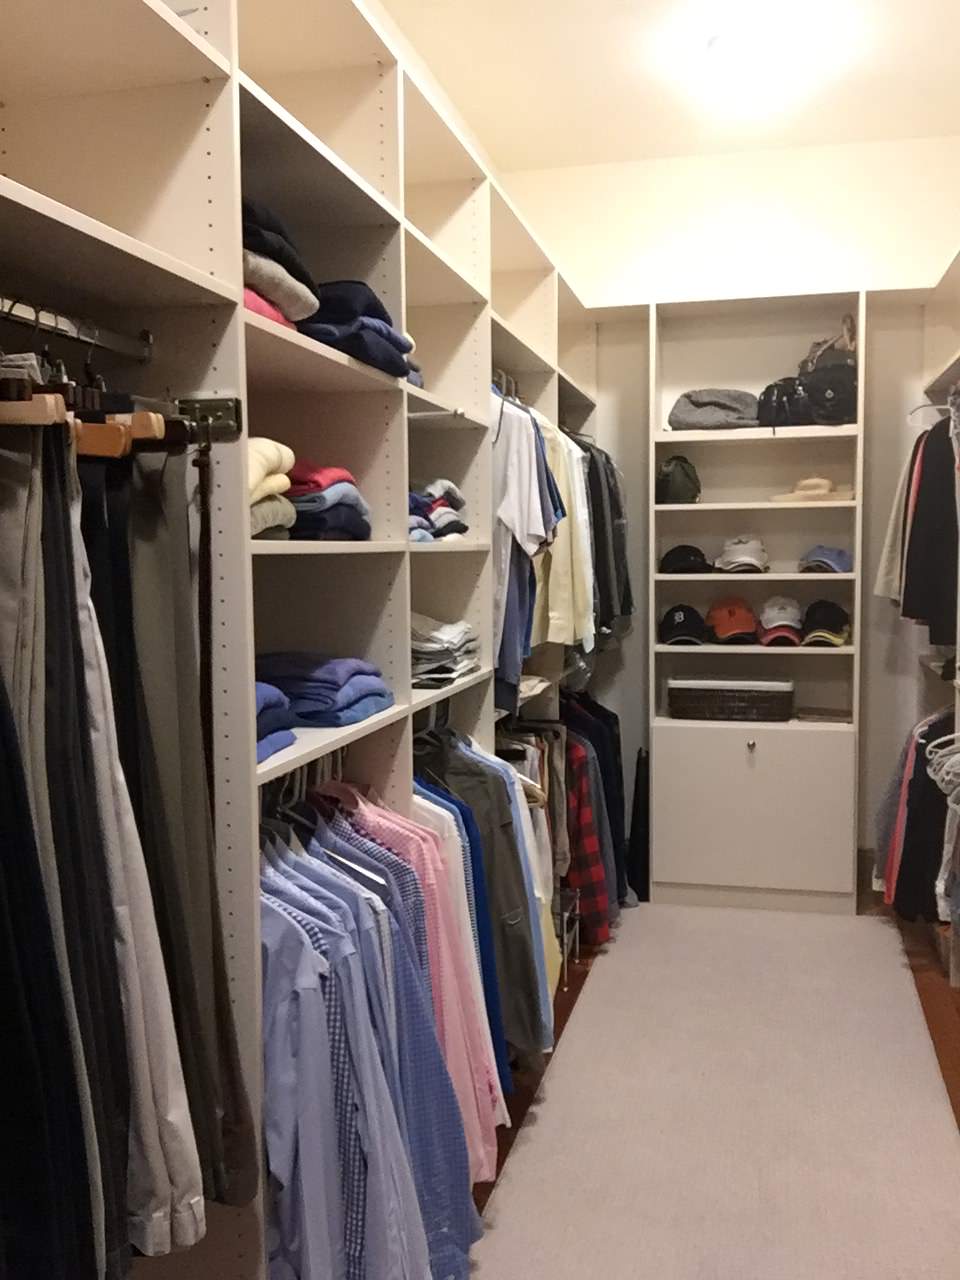 This is our clients finished closet complete and organized. They have made the best use of their space and have room to grow!